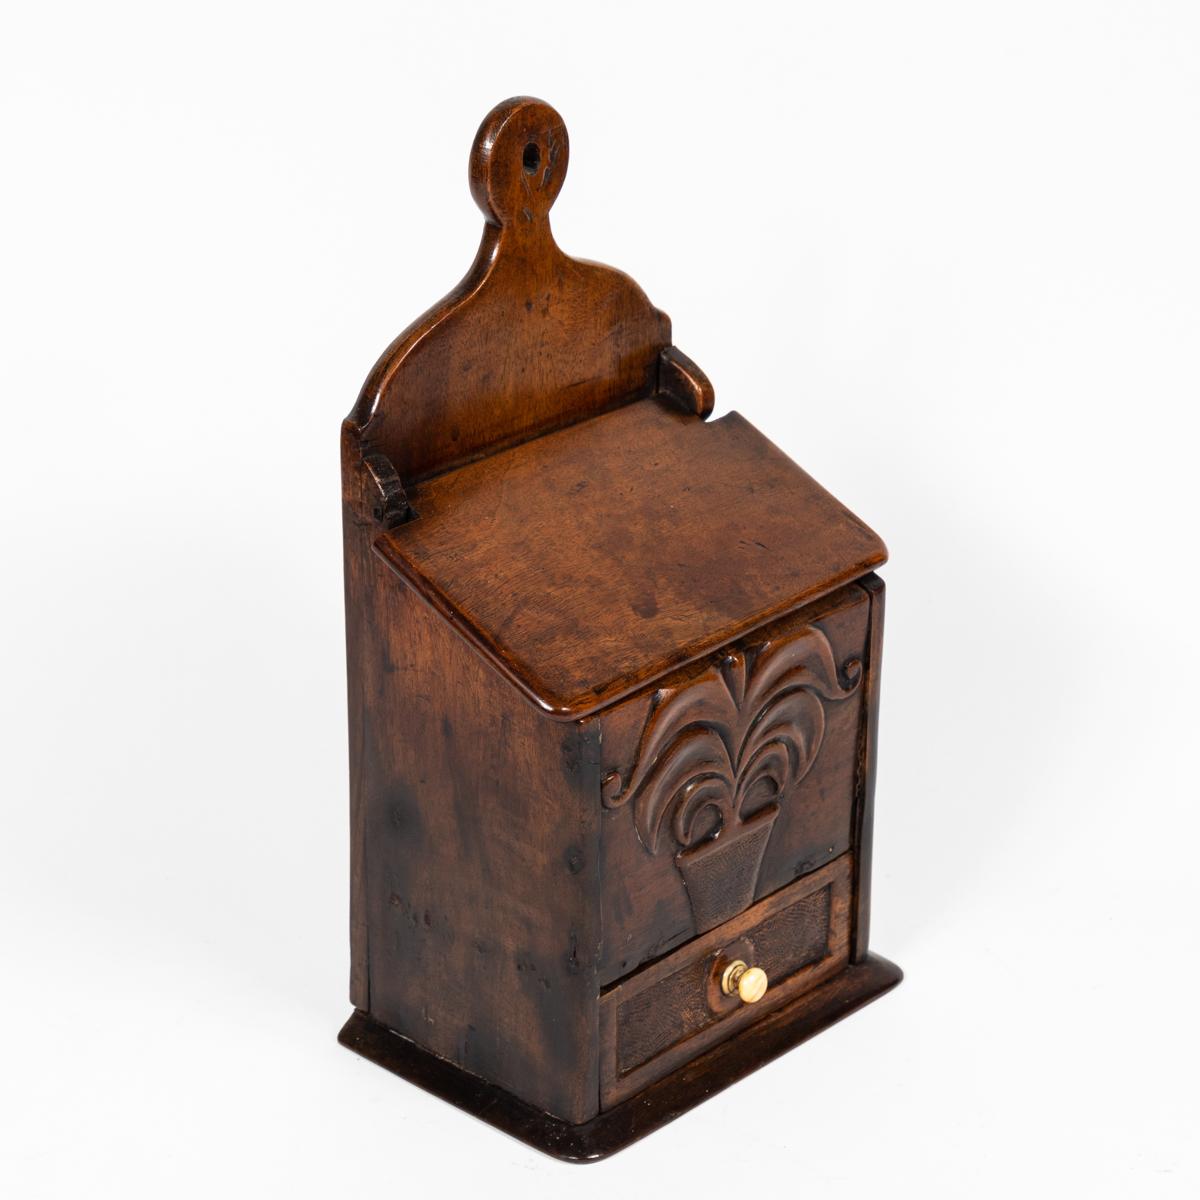 English late 18th-century fruitwood spice box, featuring a small drawer at its base with a carved ivory knob. The figurative carving of a plant on the box's front speaks to piece's original function. Due to its notched handle support, the box can be